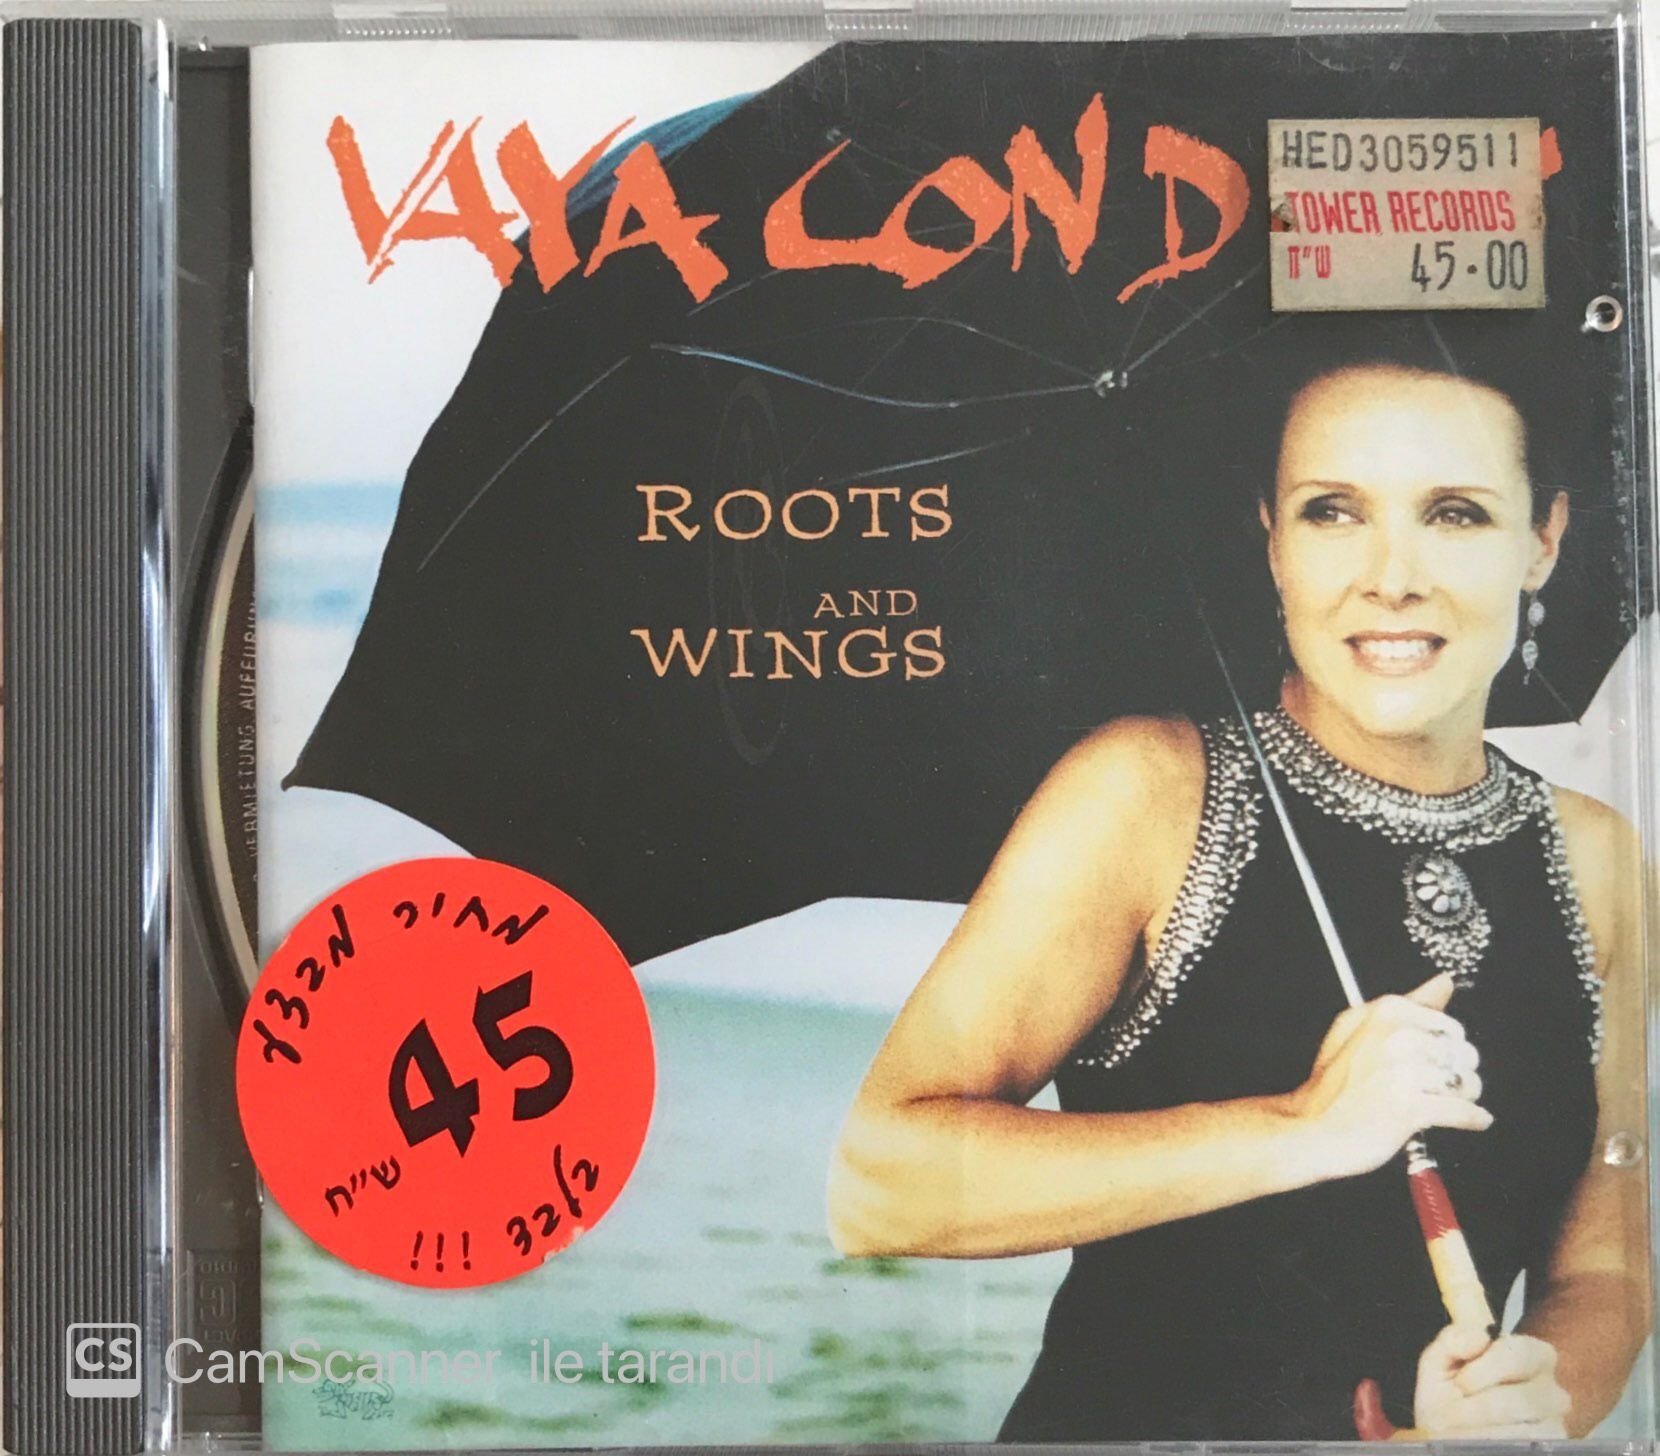 Vaya Con Dios - Roots And Wings CD